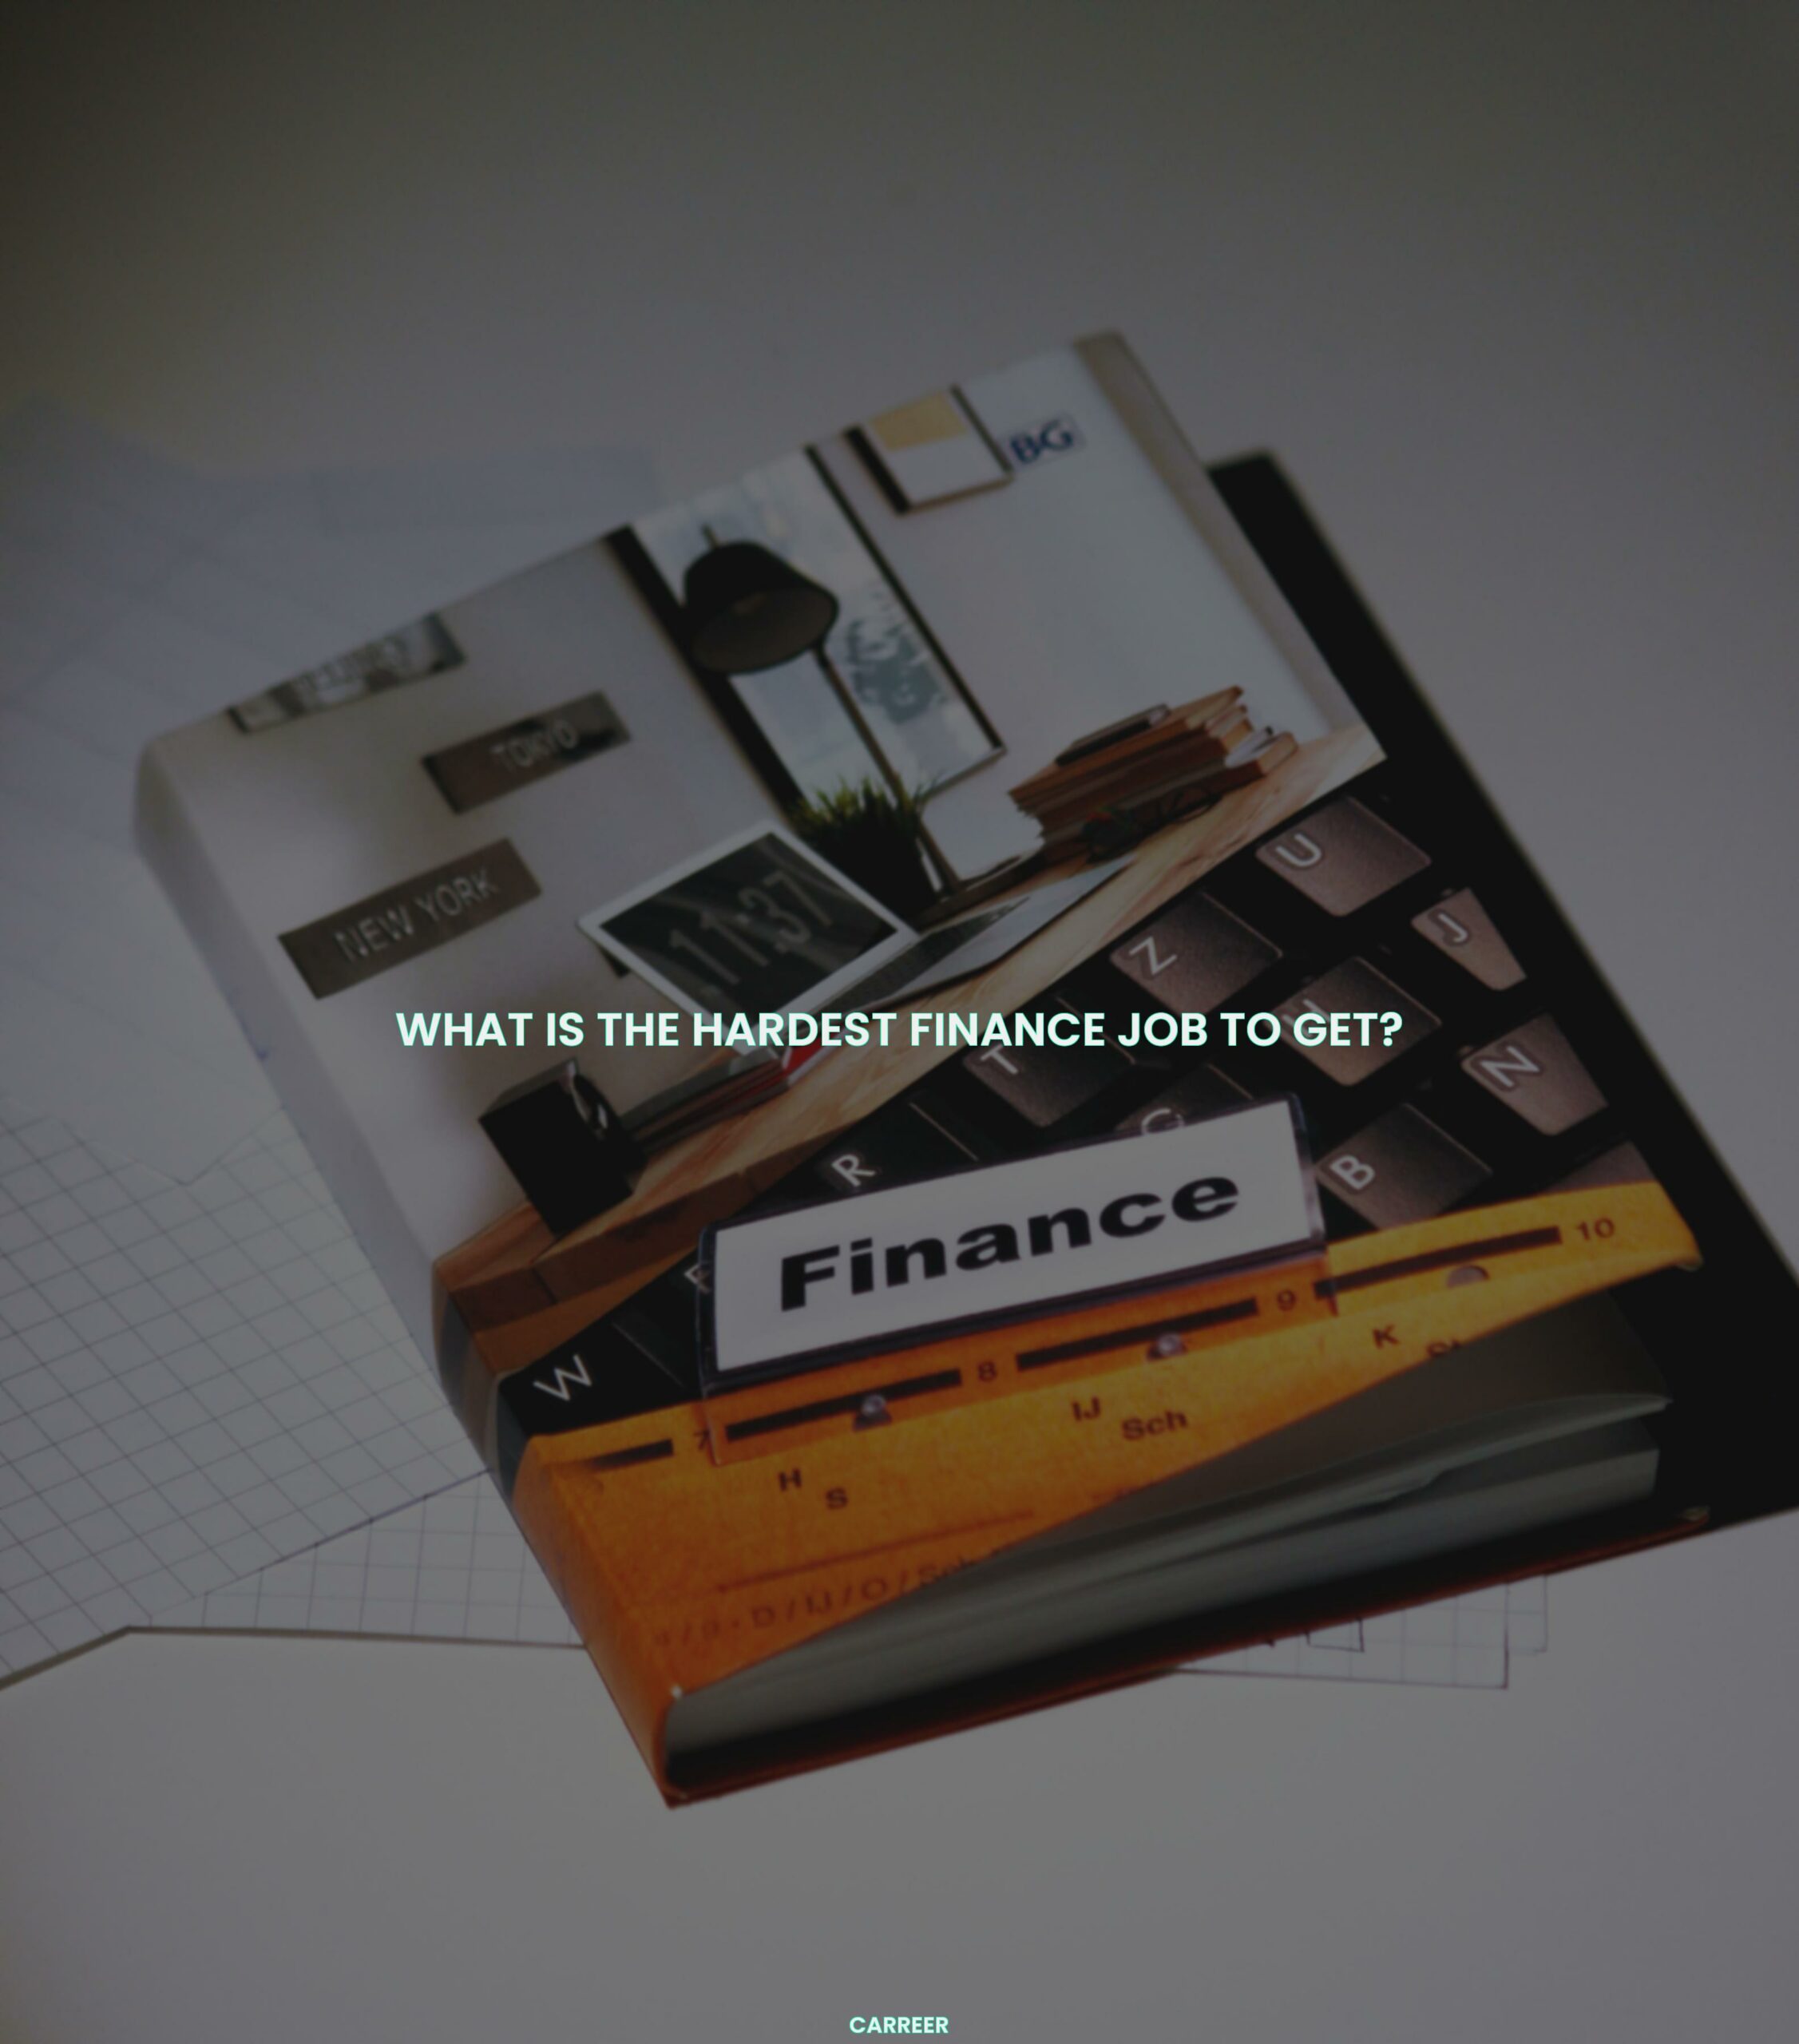 What is the hardest finance job to get?